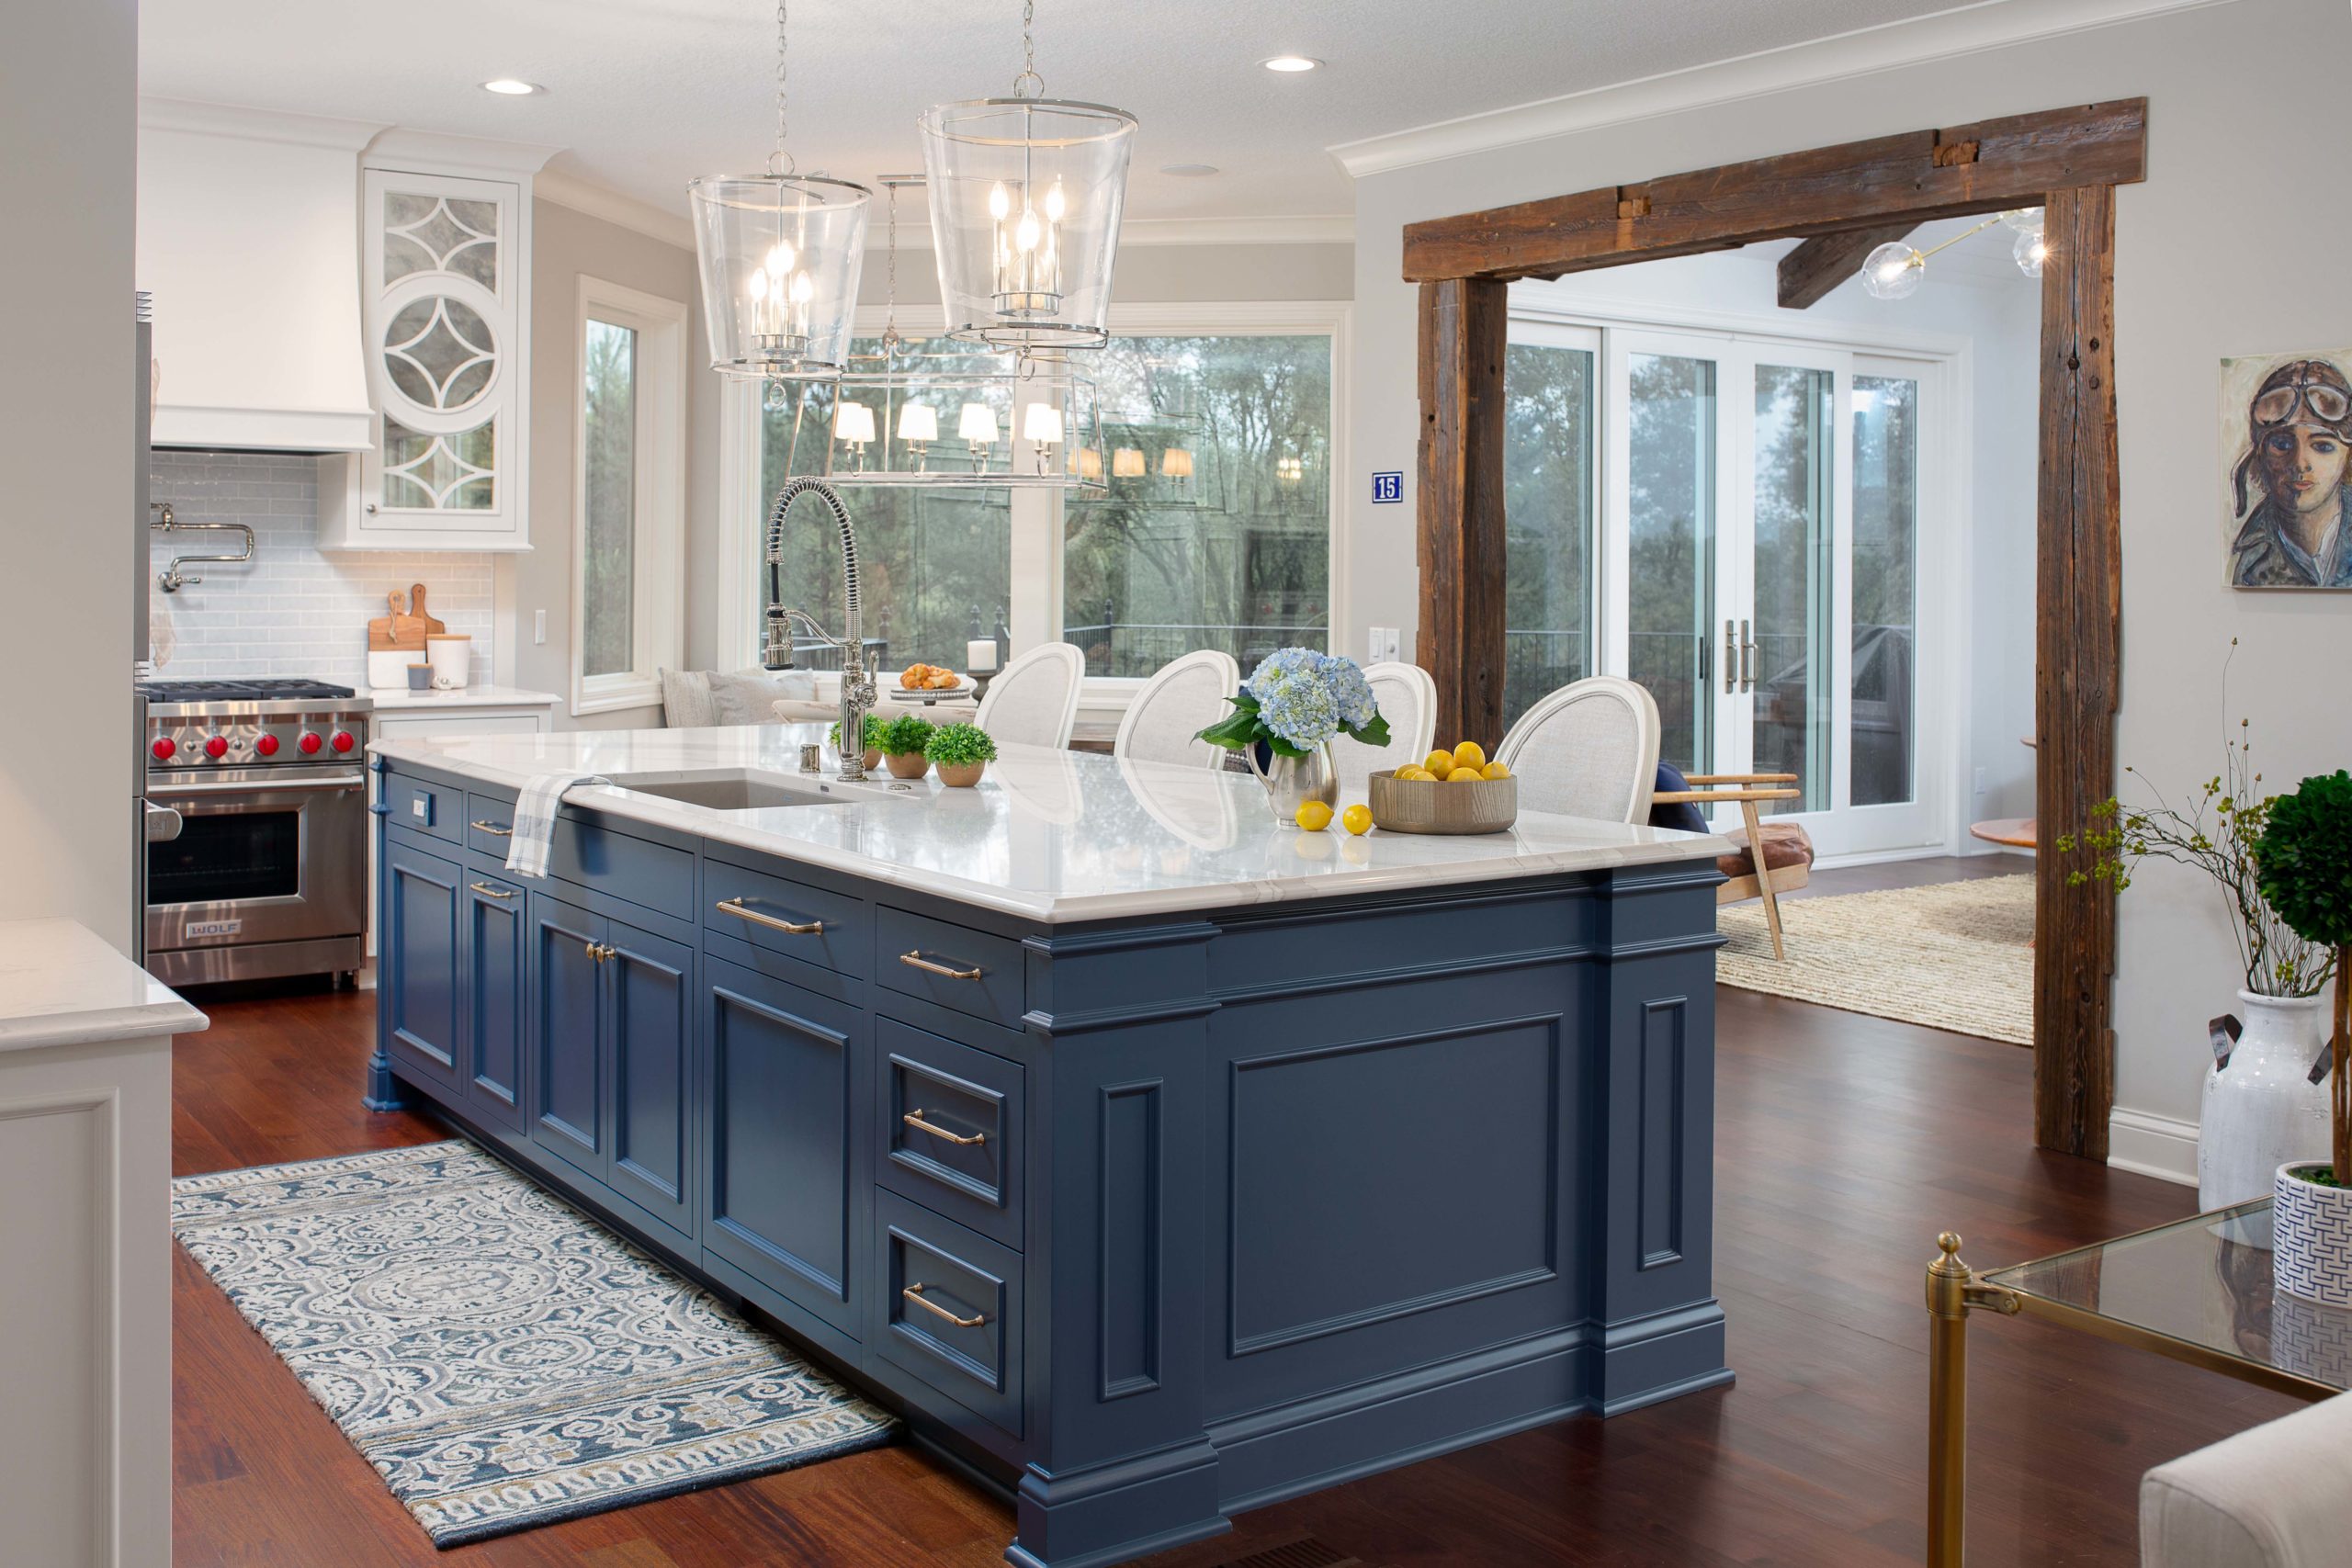 French country style kitchen with oversized island painted blue and white countertops